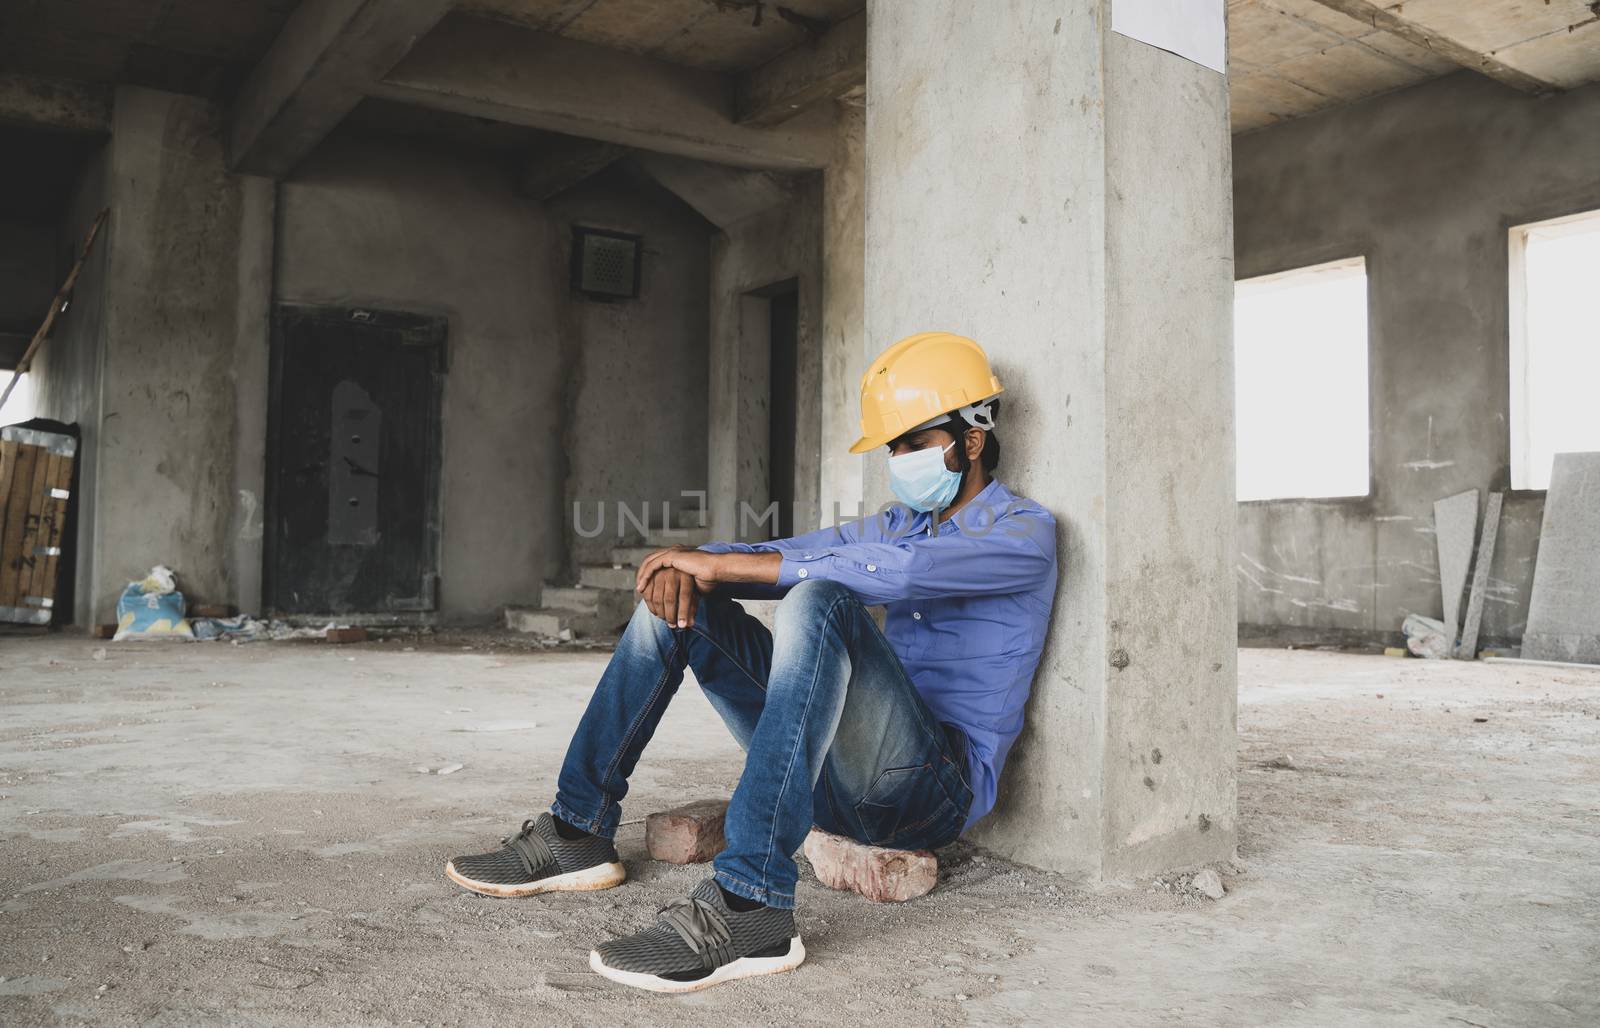 construction worker sitting sad and lonely at job site wearing a medical mask with hardhat to prevent Covid-19 spreading, Concept of unemployment, economic crisis Job loss during coronavirus crisis. by lakshmiprasad.maski@gmai.com